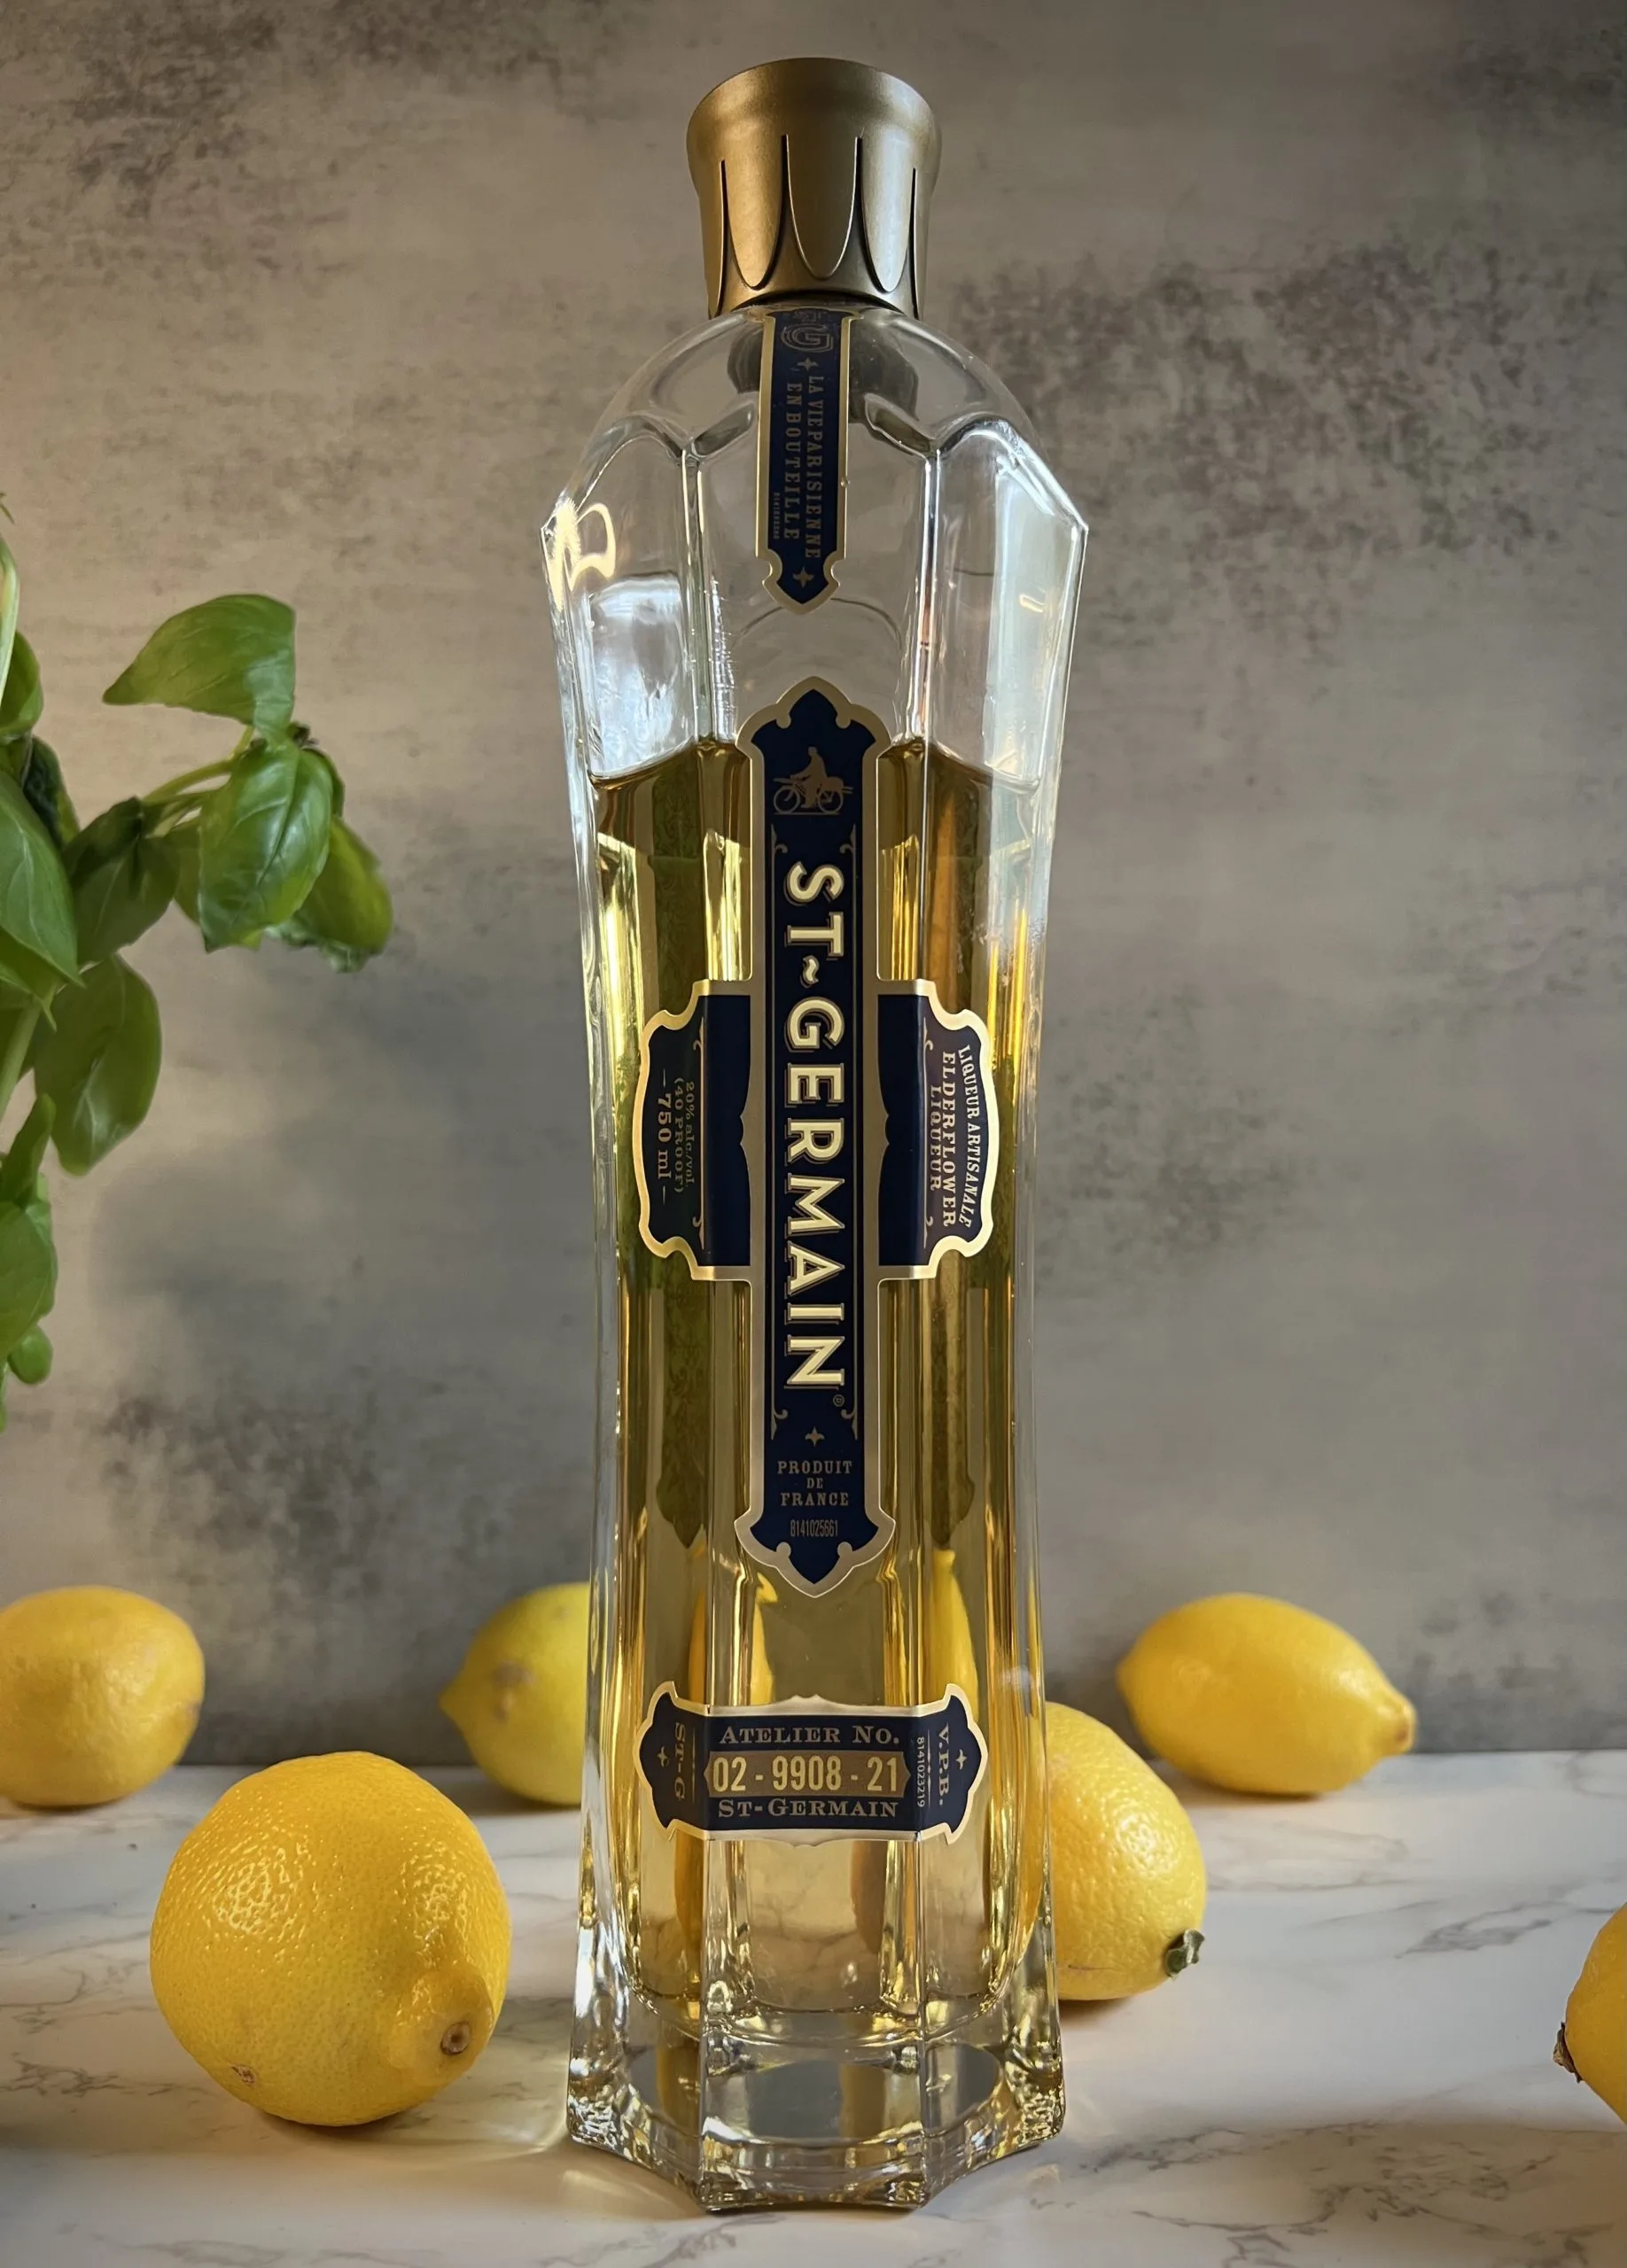 A bottle of St Germain Elderflower Liqueur on a countertop surrounded by lemons with a basil plant in the background.